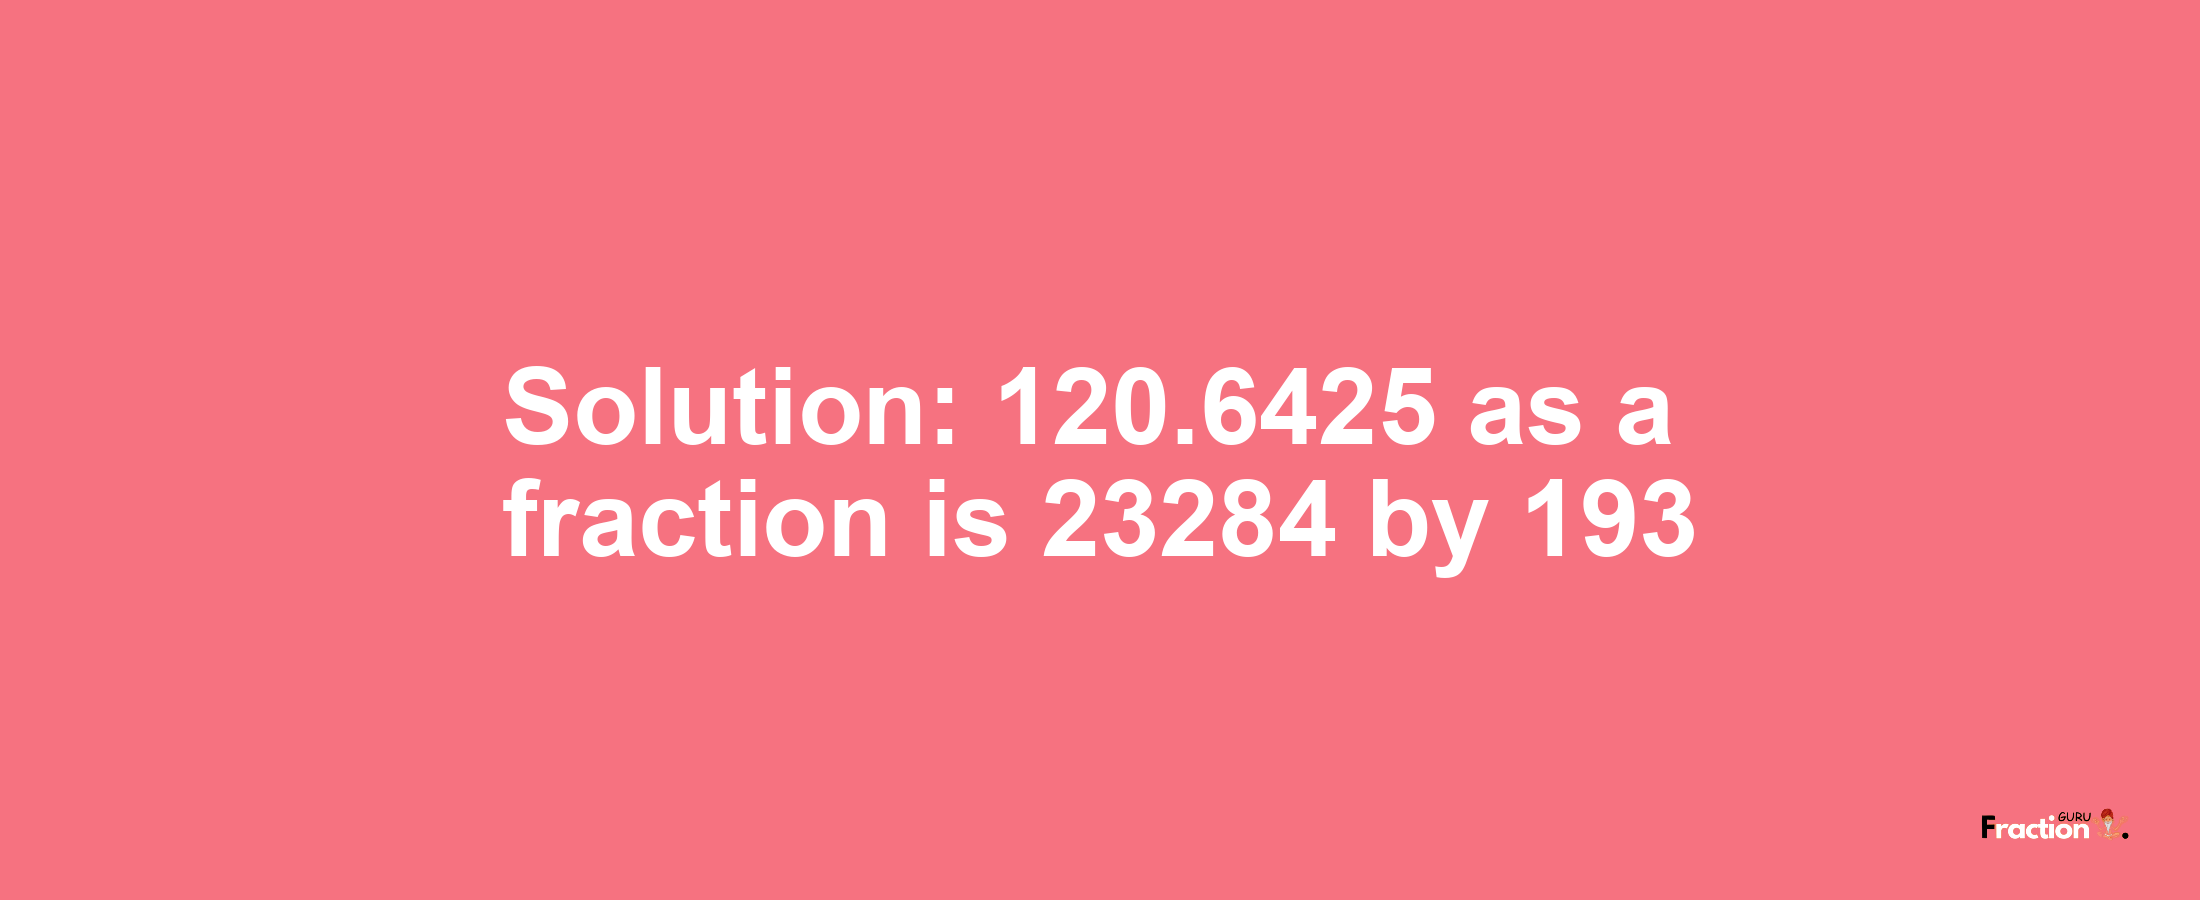 Solution:120.6425 as a fraction is 23284/193